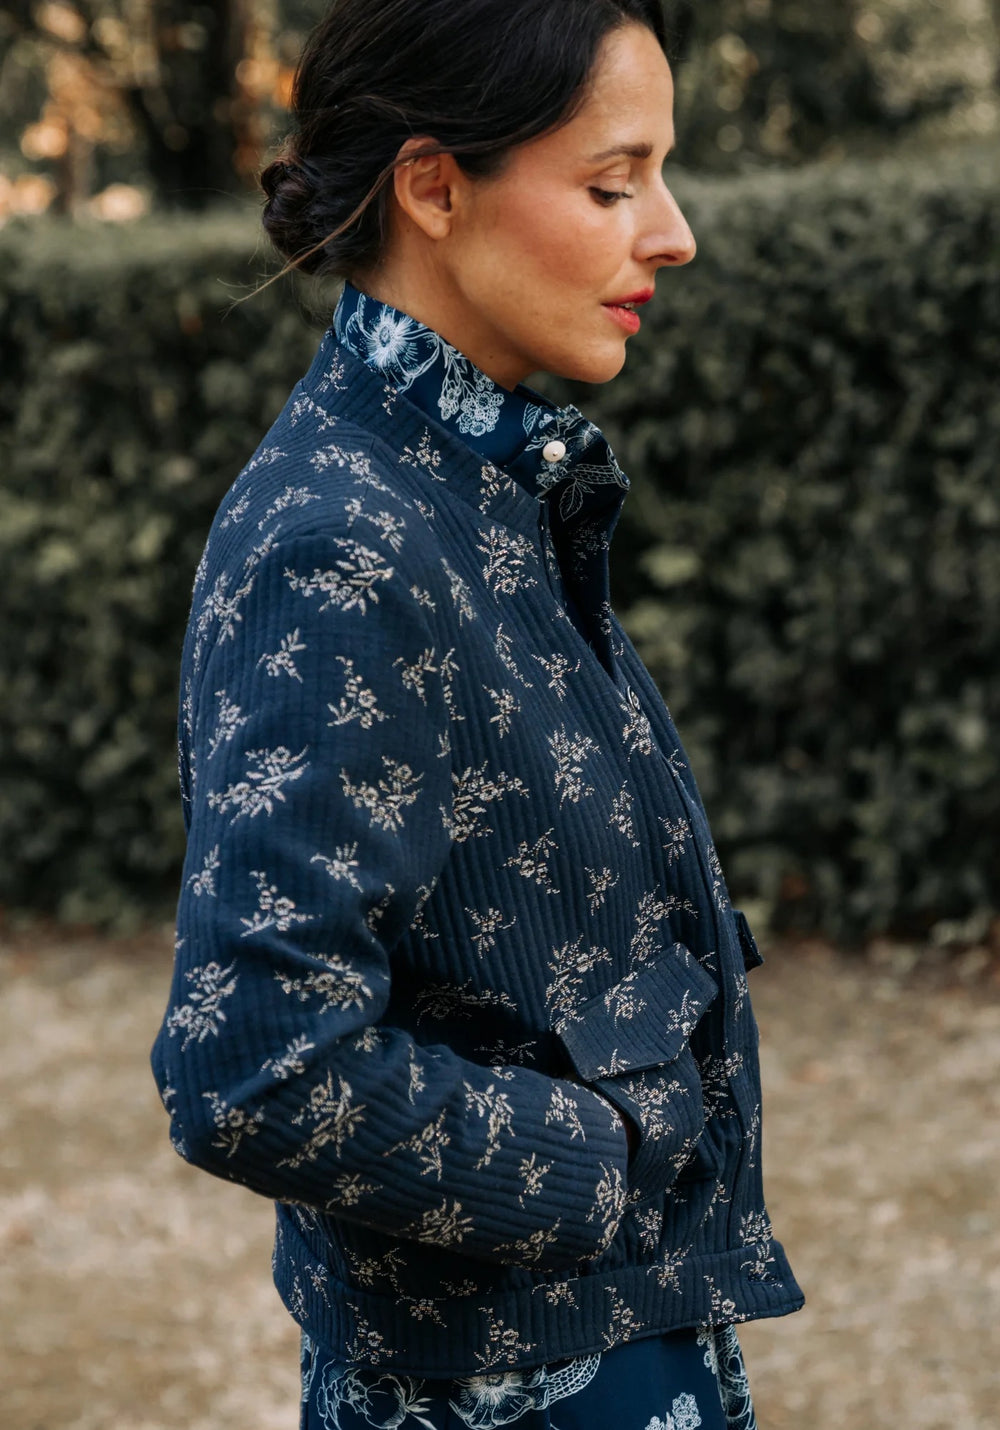 Woman wearing the Dandelion Jacket sewing pattern from Maison Fauve on The Fold Line. A jacket pattern made in jacquard, wool, tweed, denim, or gabardine fabrics, featuring a waistband, button front closure, back pleats, stand collar, and front patch pock